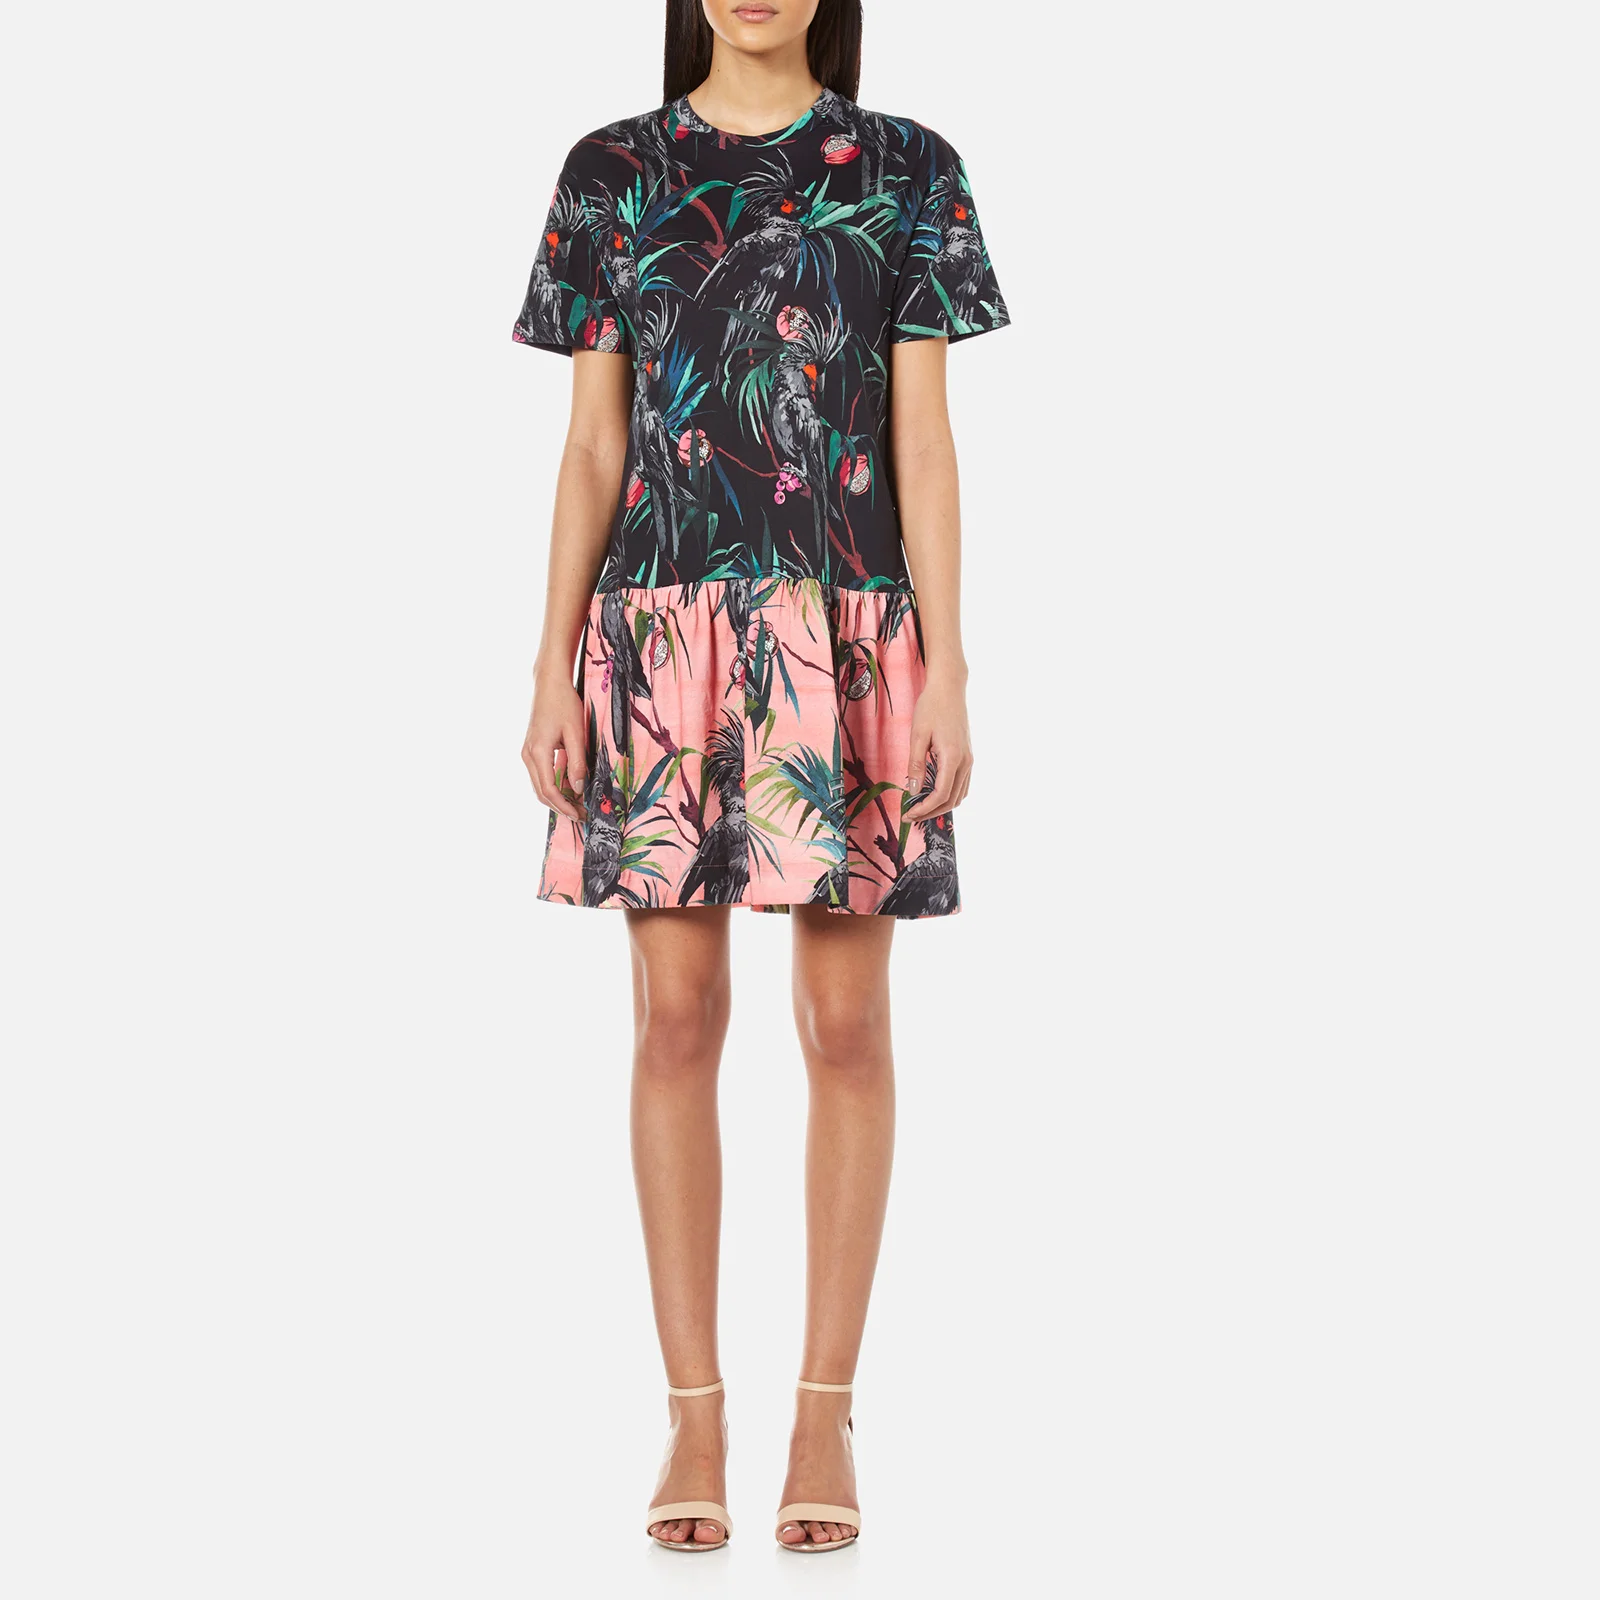 PS by Paul Smith Women's Cockatoo Jersey Dress - Black Image 1